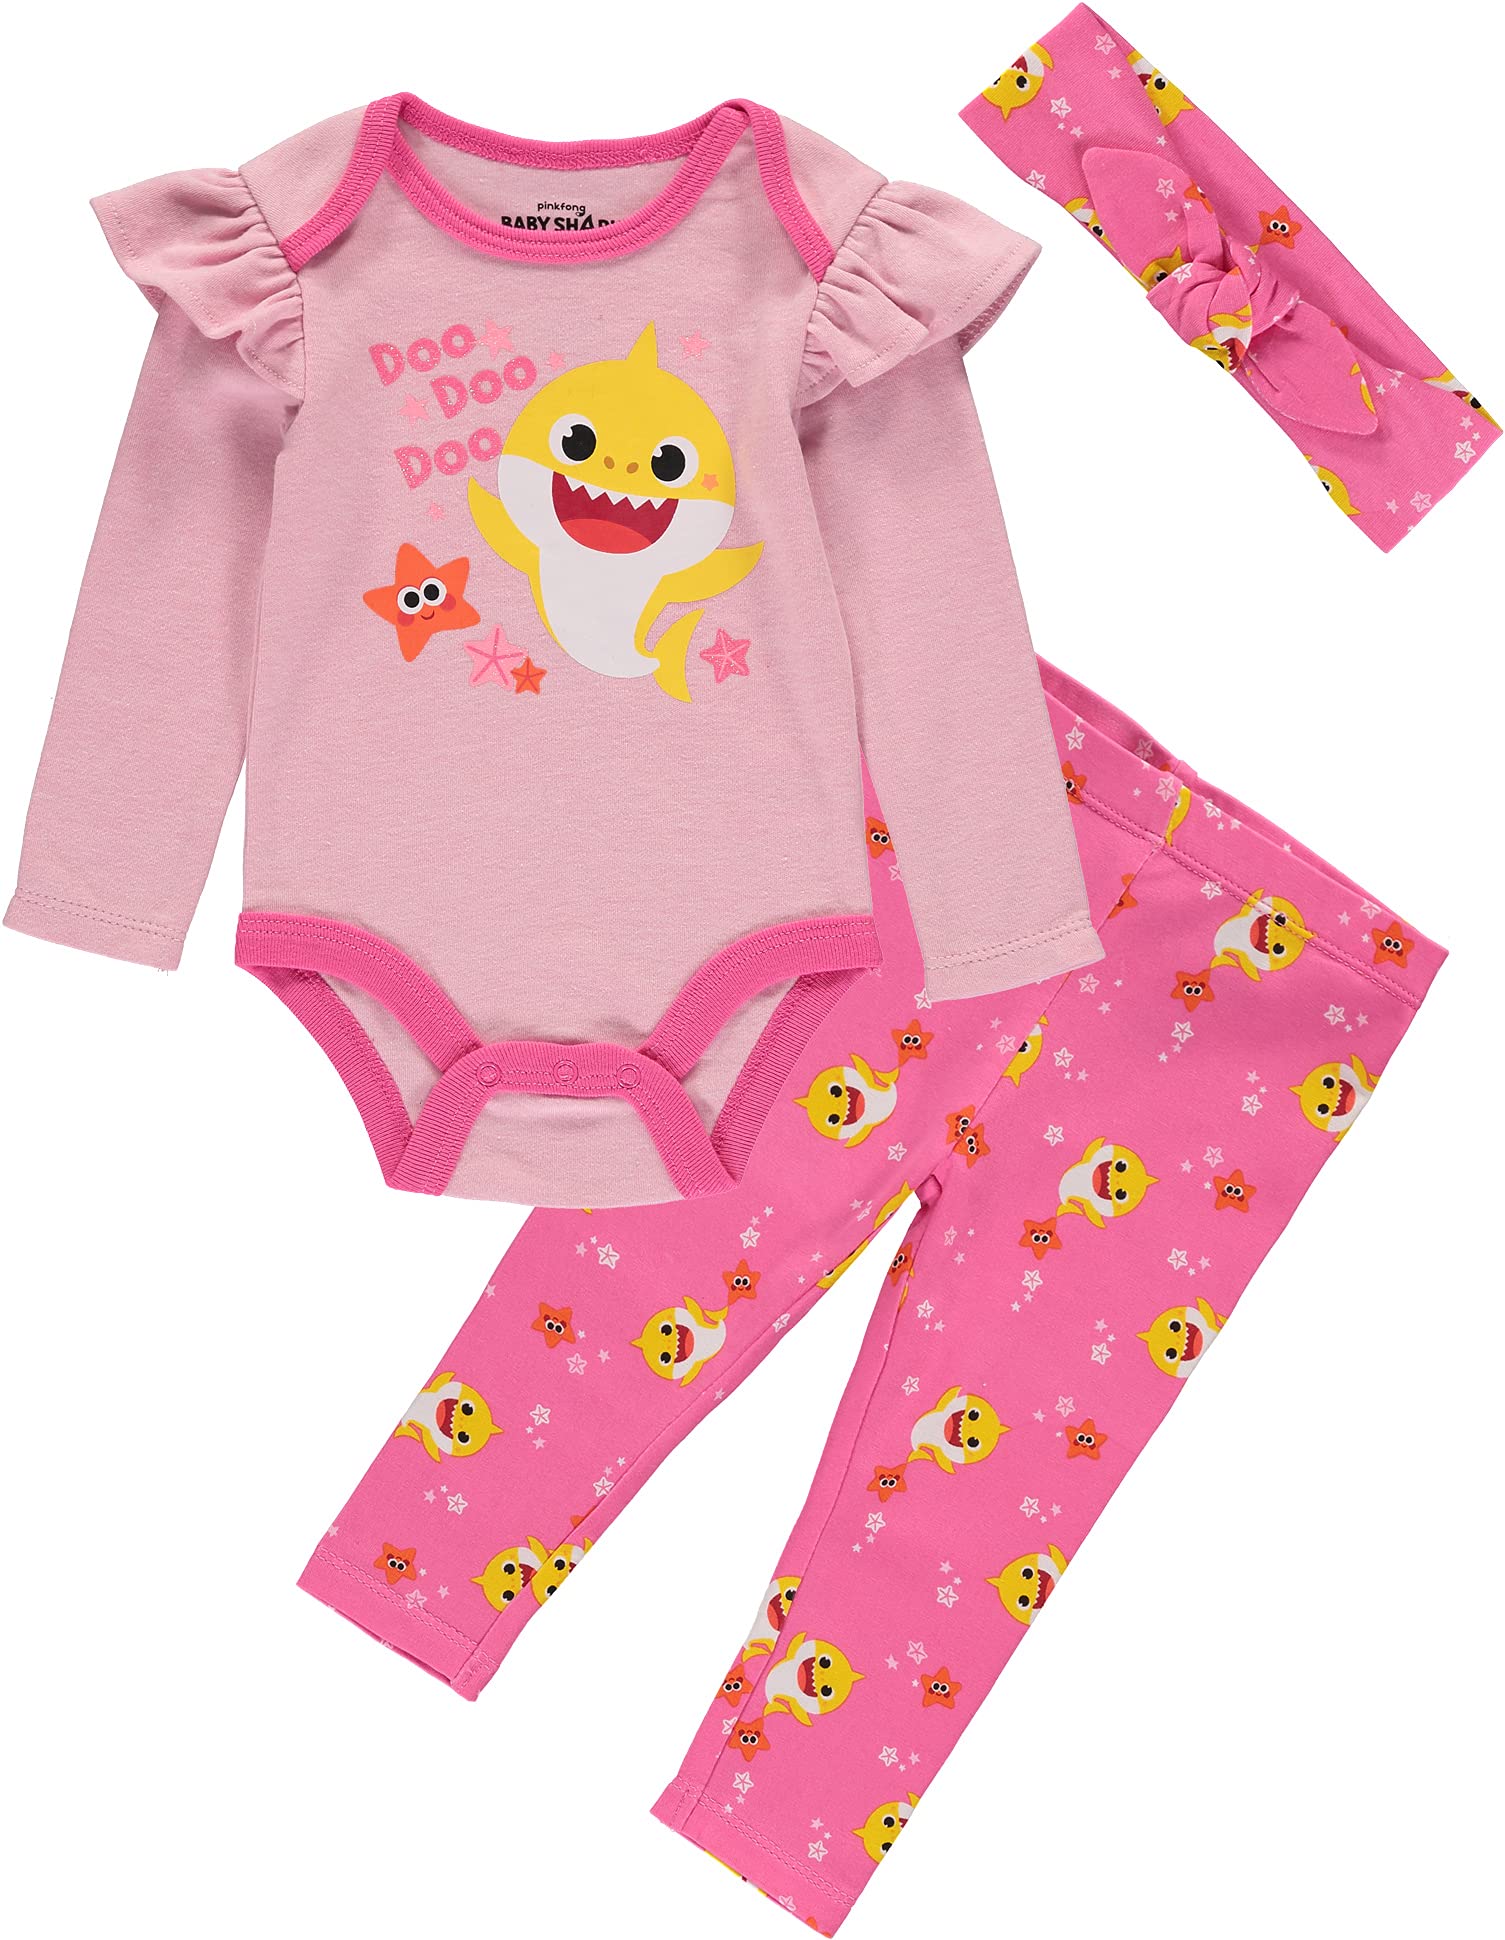 Baby Shark Girls' Creeper Bodysuit with Pull on Pants and Matching Headband 3 Piece Set (Pink/Rose, 0-3 Months)